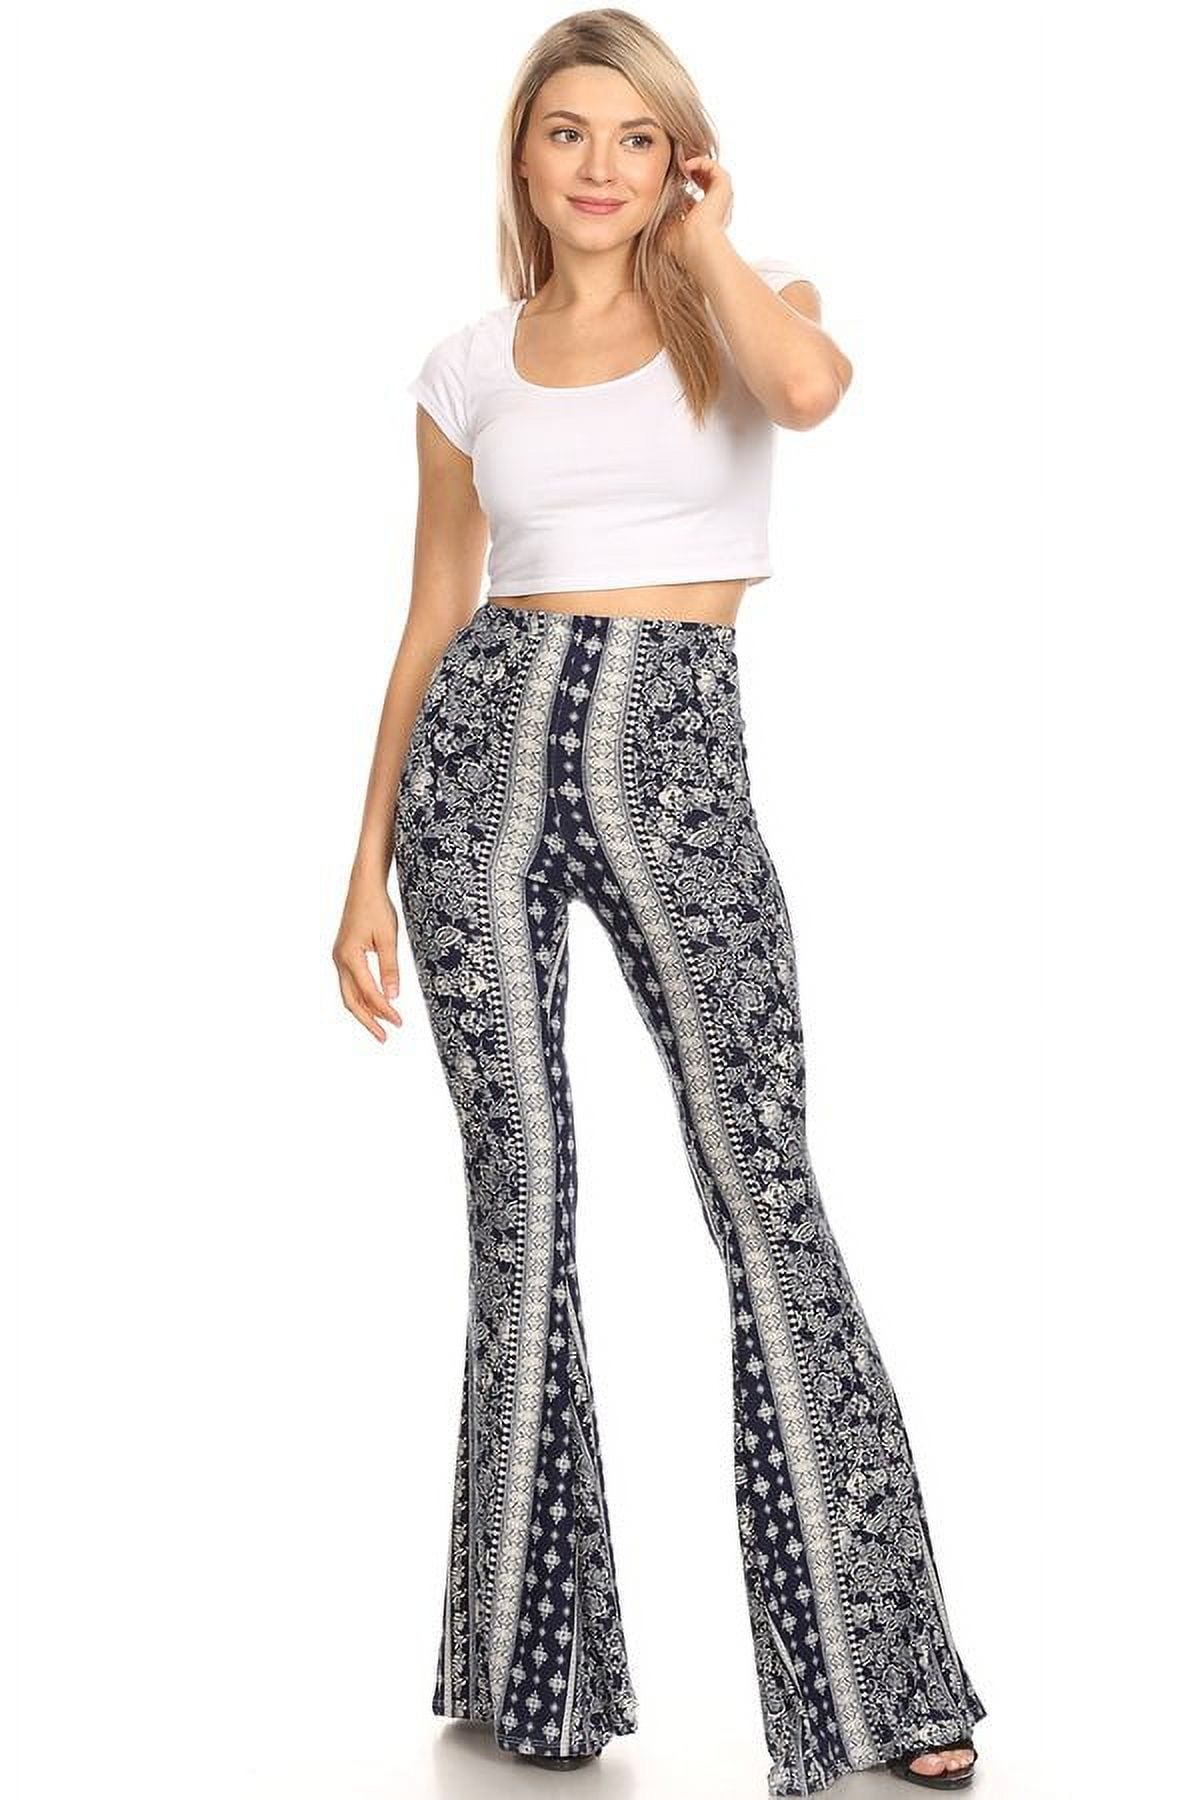 Falling for Sophie Wessex's funky flared trousers? You'll love these £29  lookalikes | HELLO!